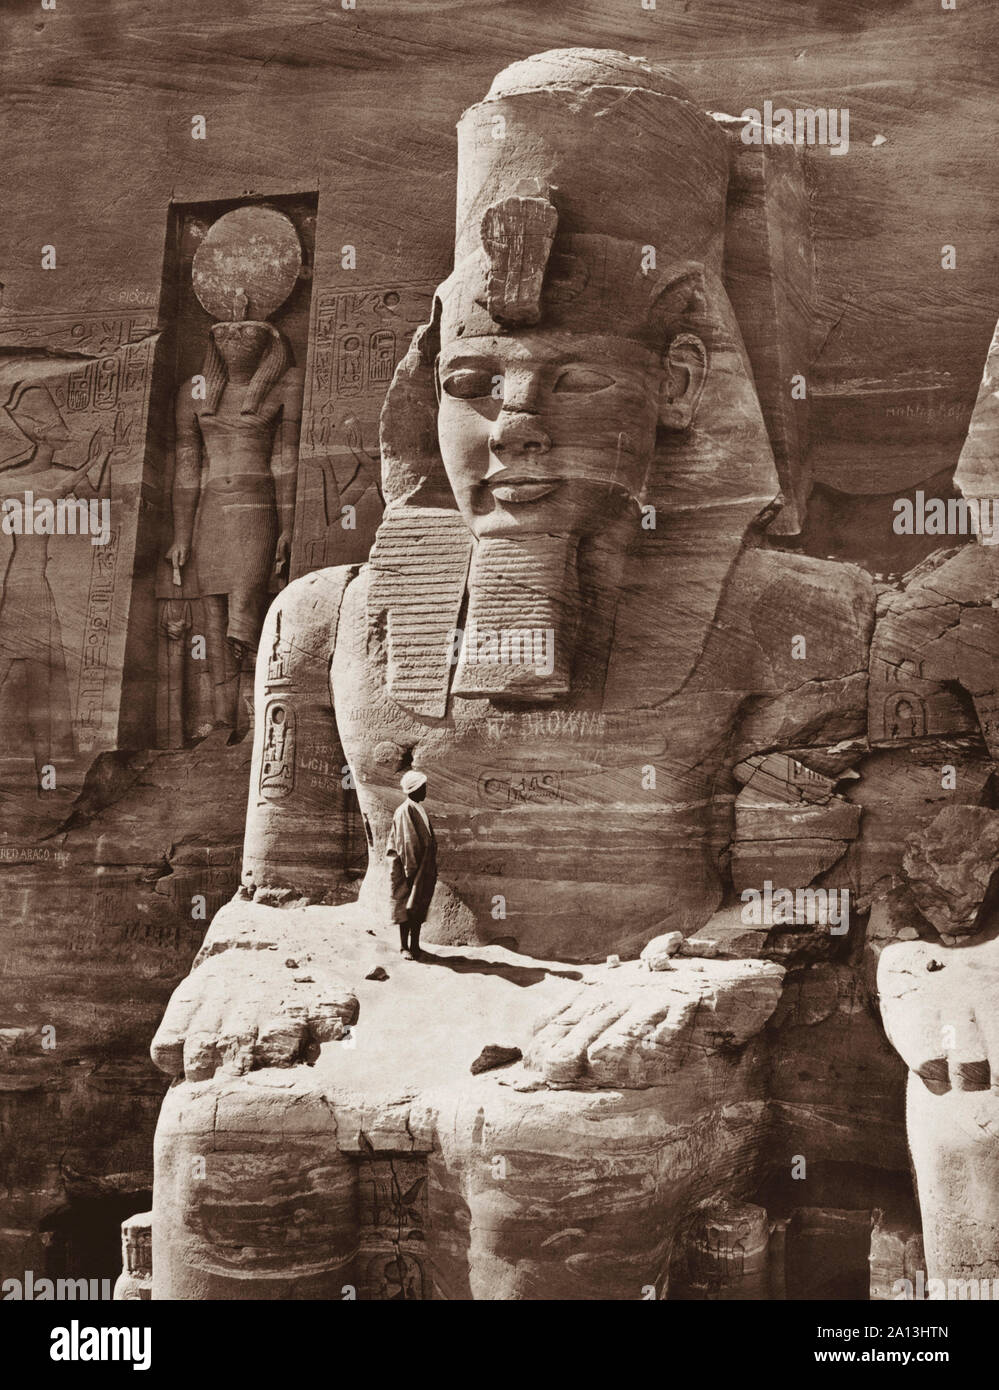 A colossal figure of Pharaoh Ramses II carved into the Great Temple at Abu Simbel. Stock Photo